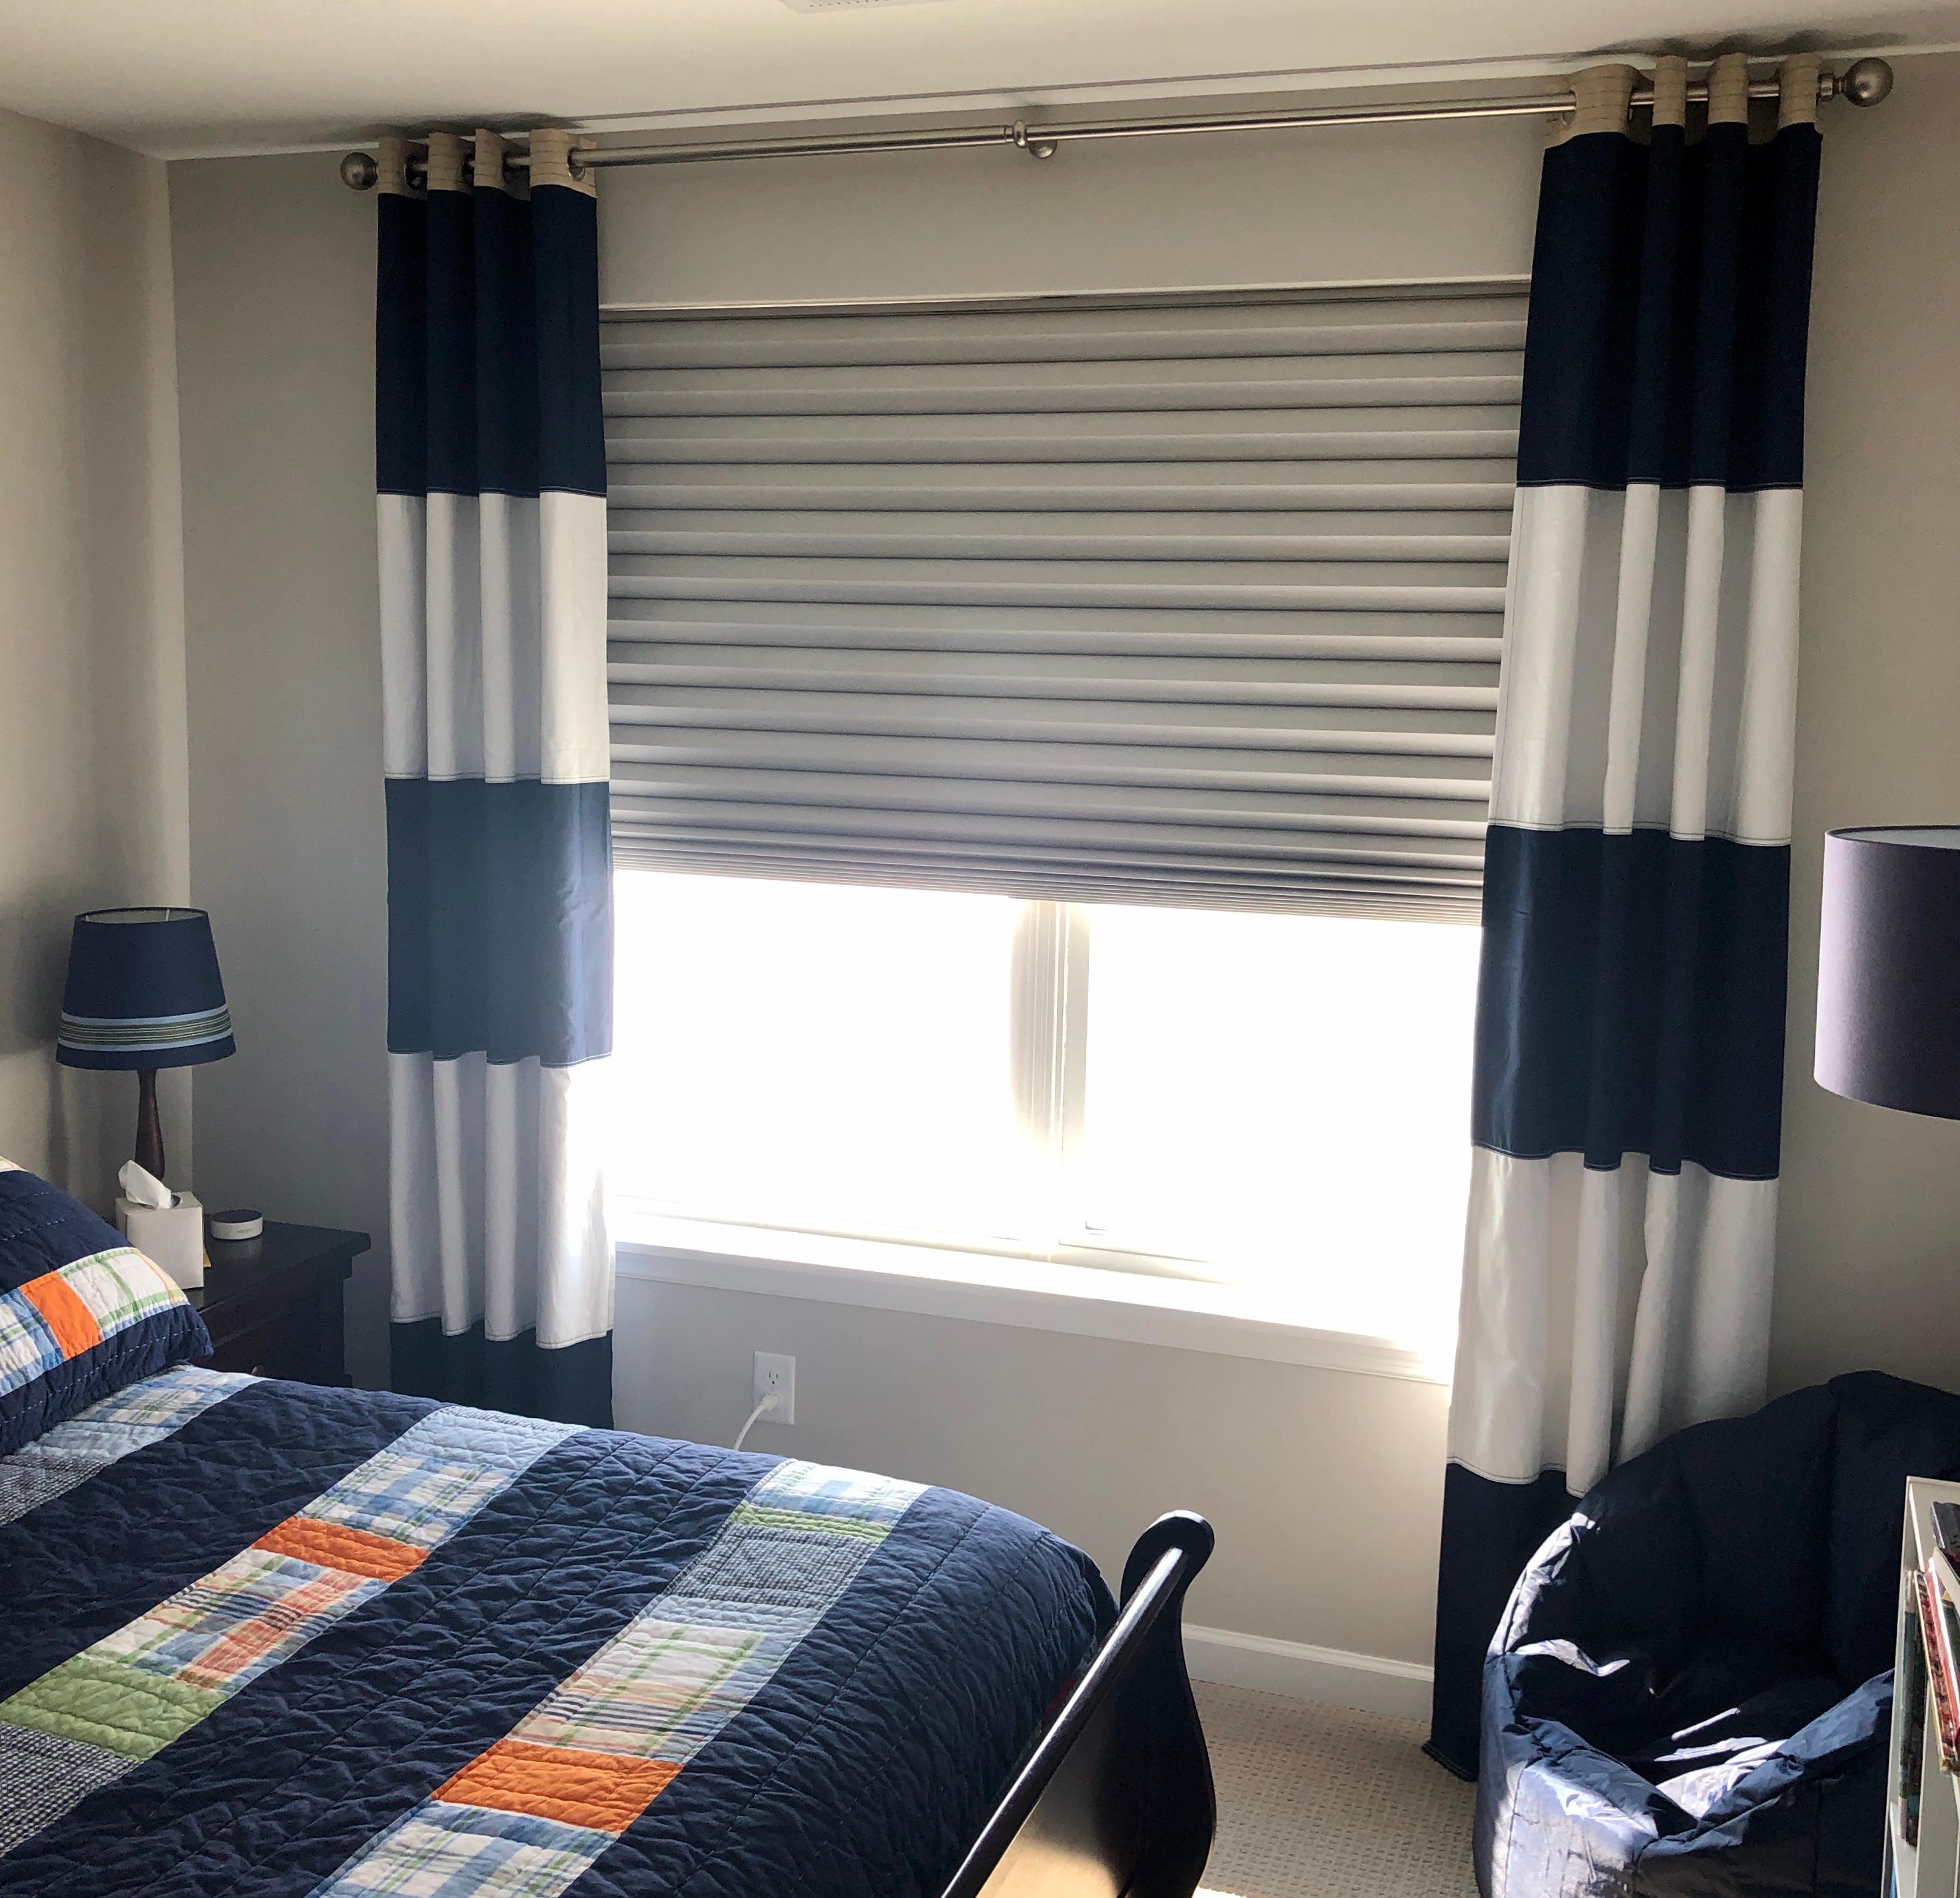 We installed a room-darkening shade and nautical-stripe stationary panels to make this child's bedroom window both functional and stylish. The shade operates without cords for child safety.